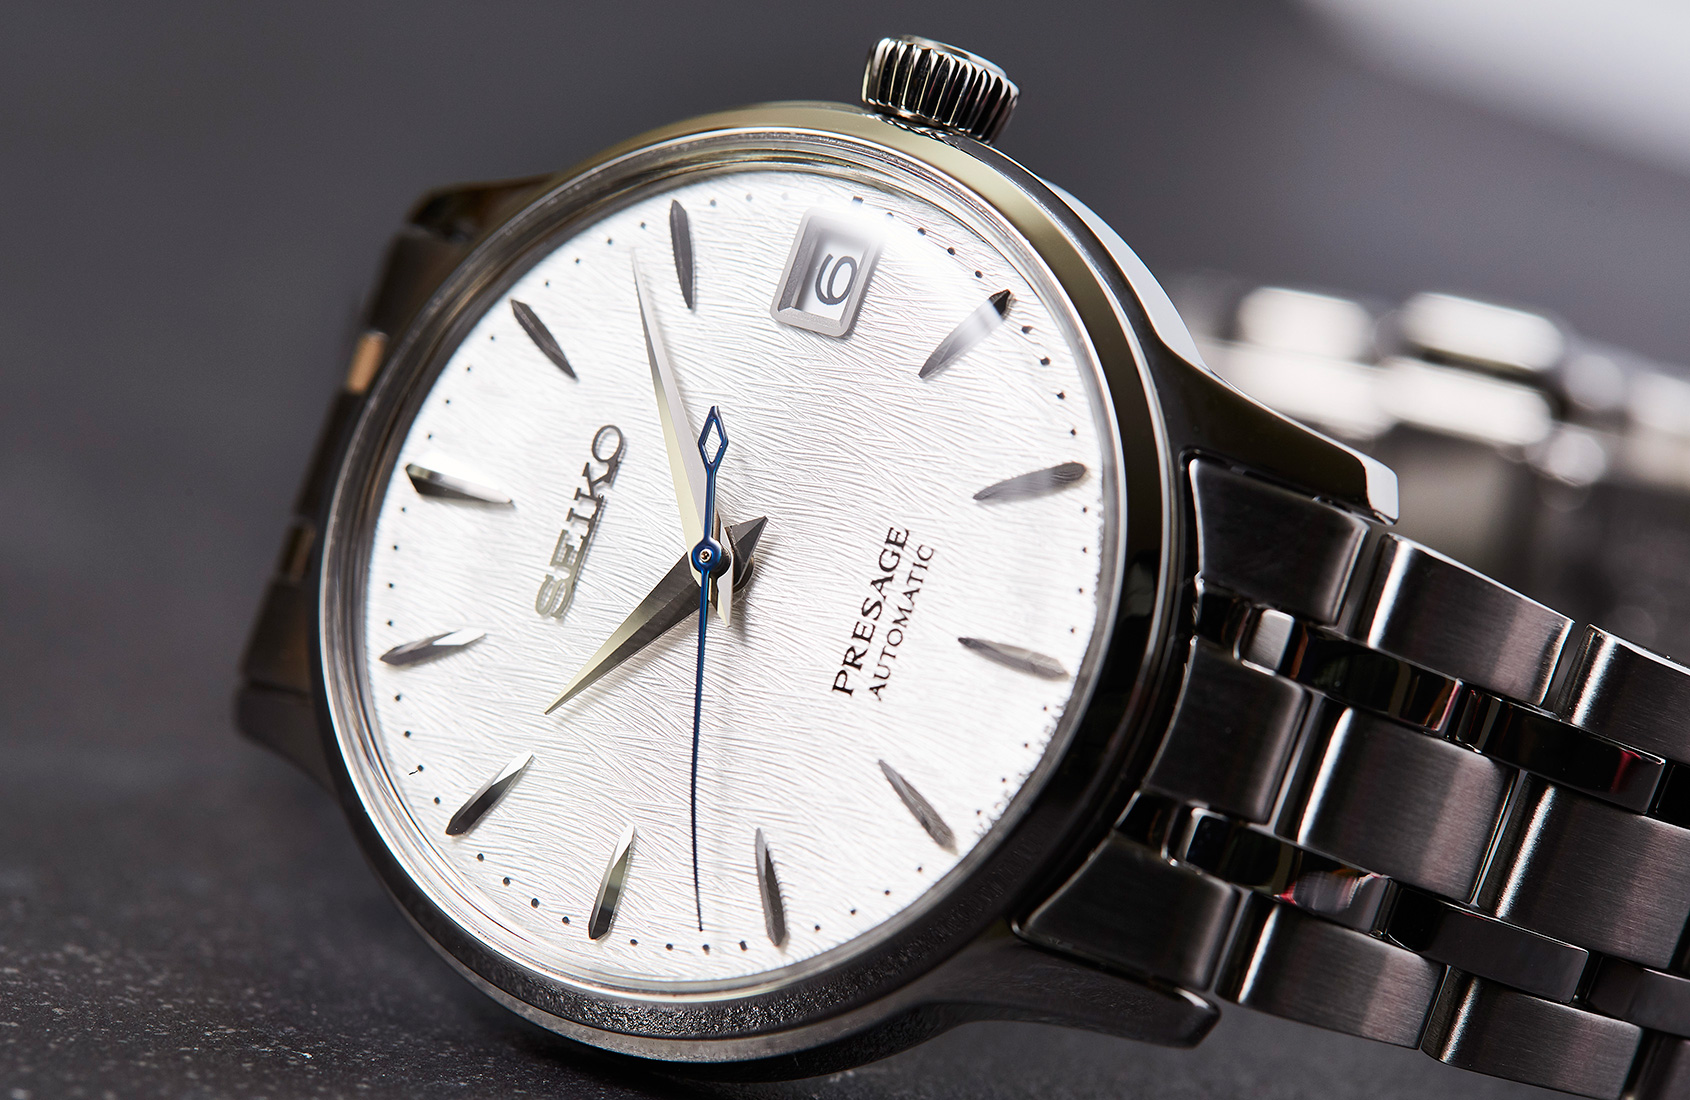 ANNOUNCING: We are selling Seiko’s latest stunning Cocktail Time, the ...